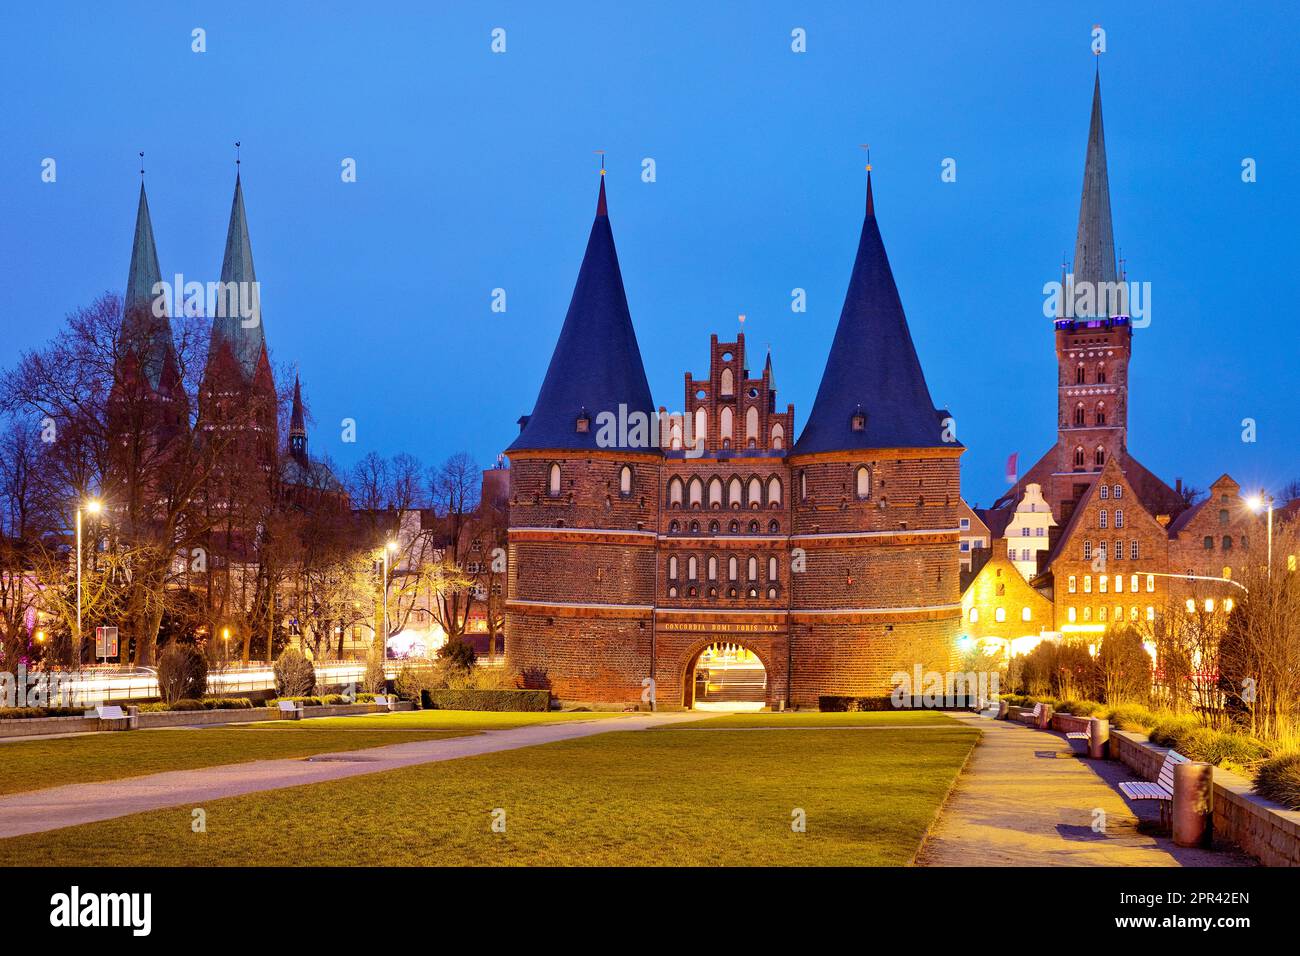 church St Marien, Holstentor, salt storehouses and chruch St Petri, in old city of Luebeck at blue hour, Germany, Schleswig-Holstein, Luebeck Stock Photo